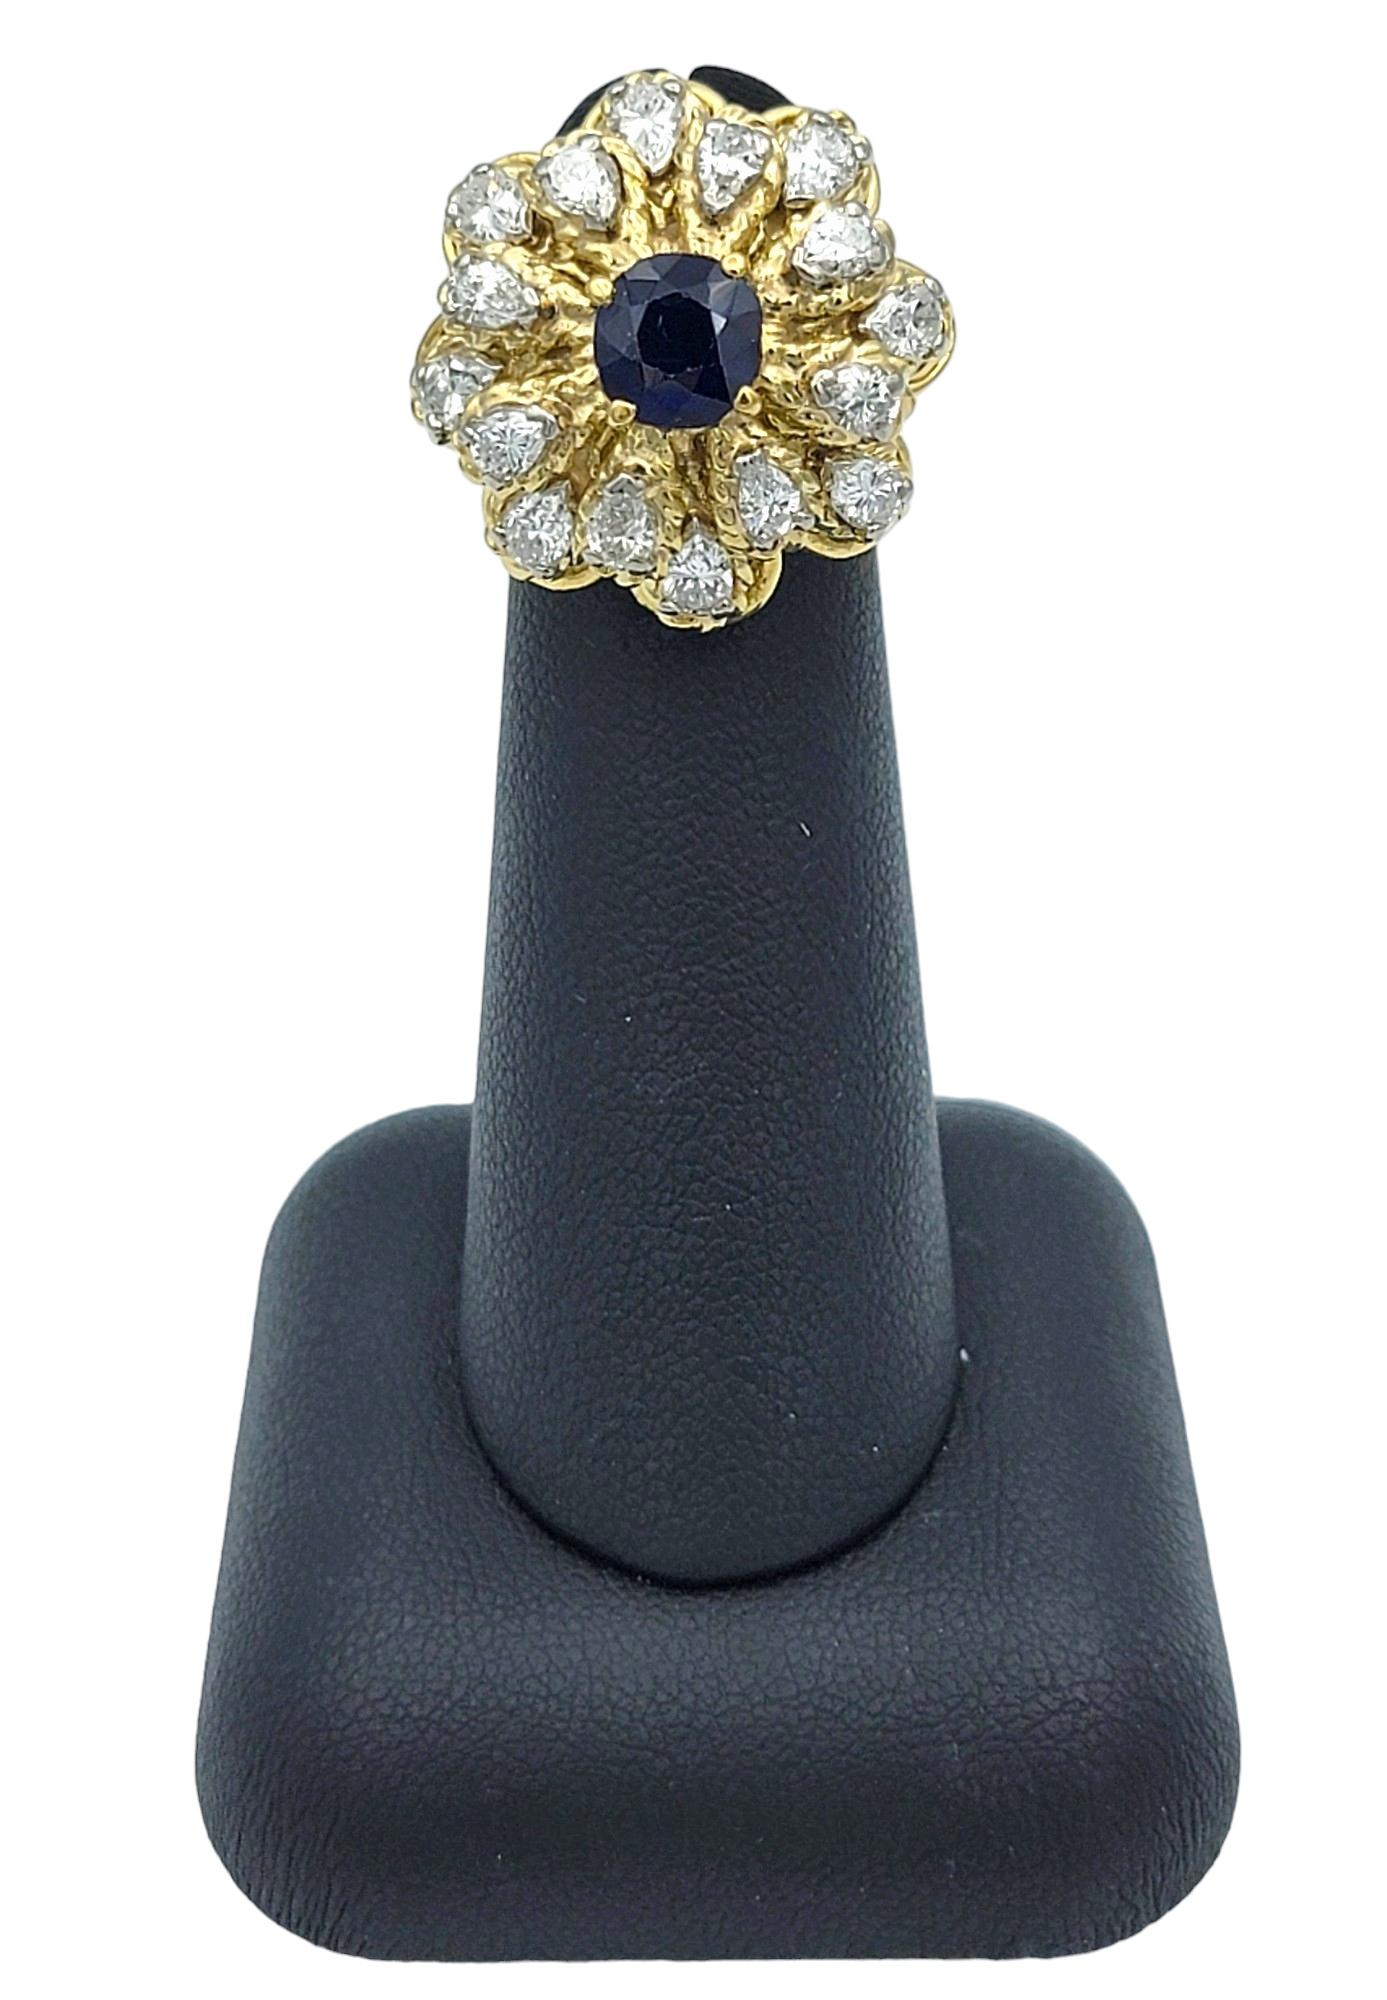 Vintage Sapphire and Diamond Flower Design Dome Ring Set in 18 Karat Yellow Gold For Sale 1